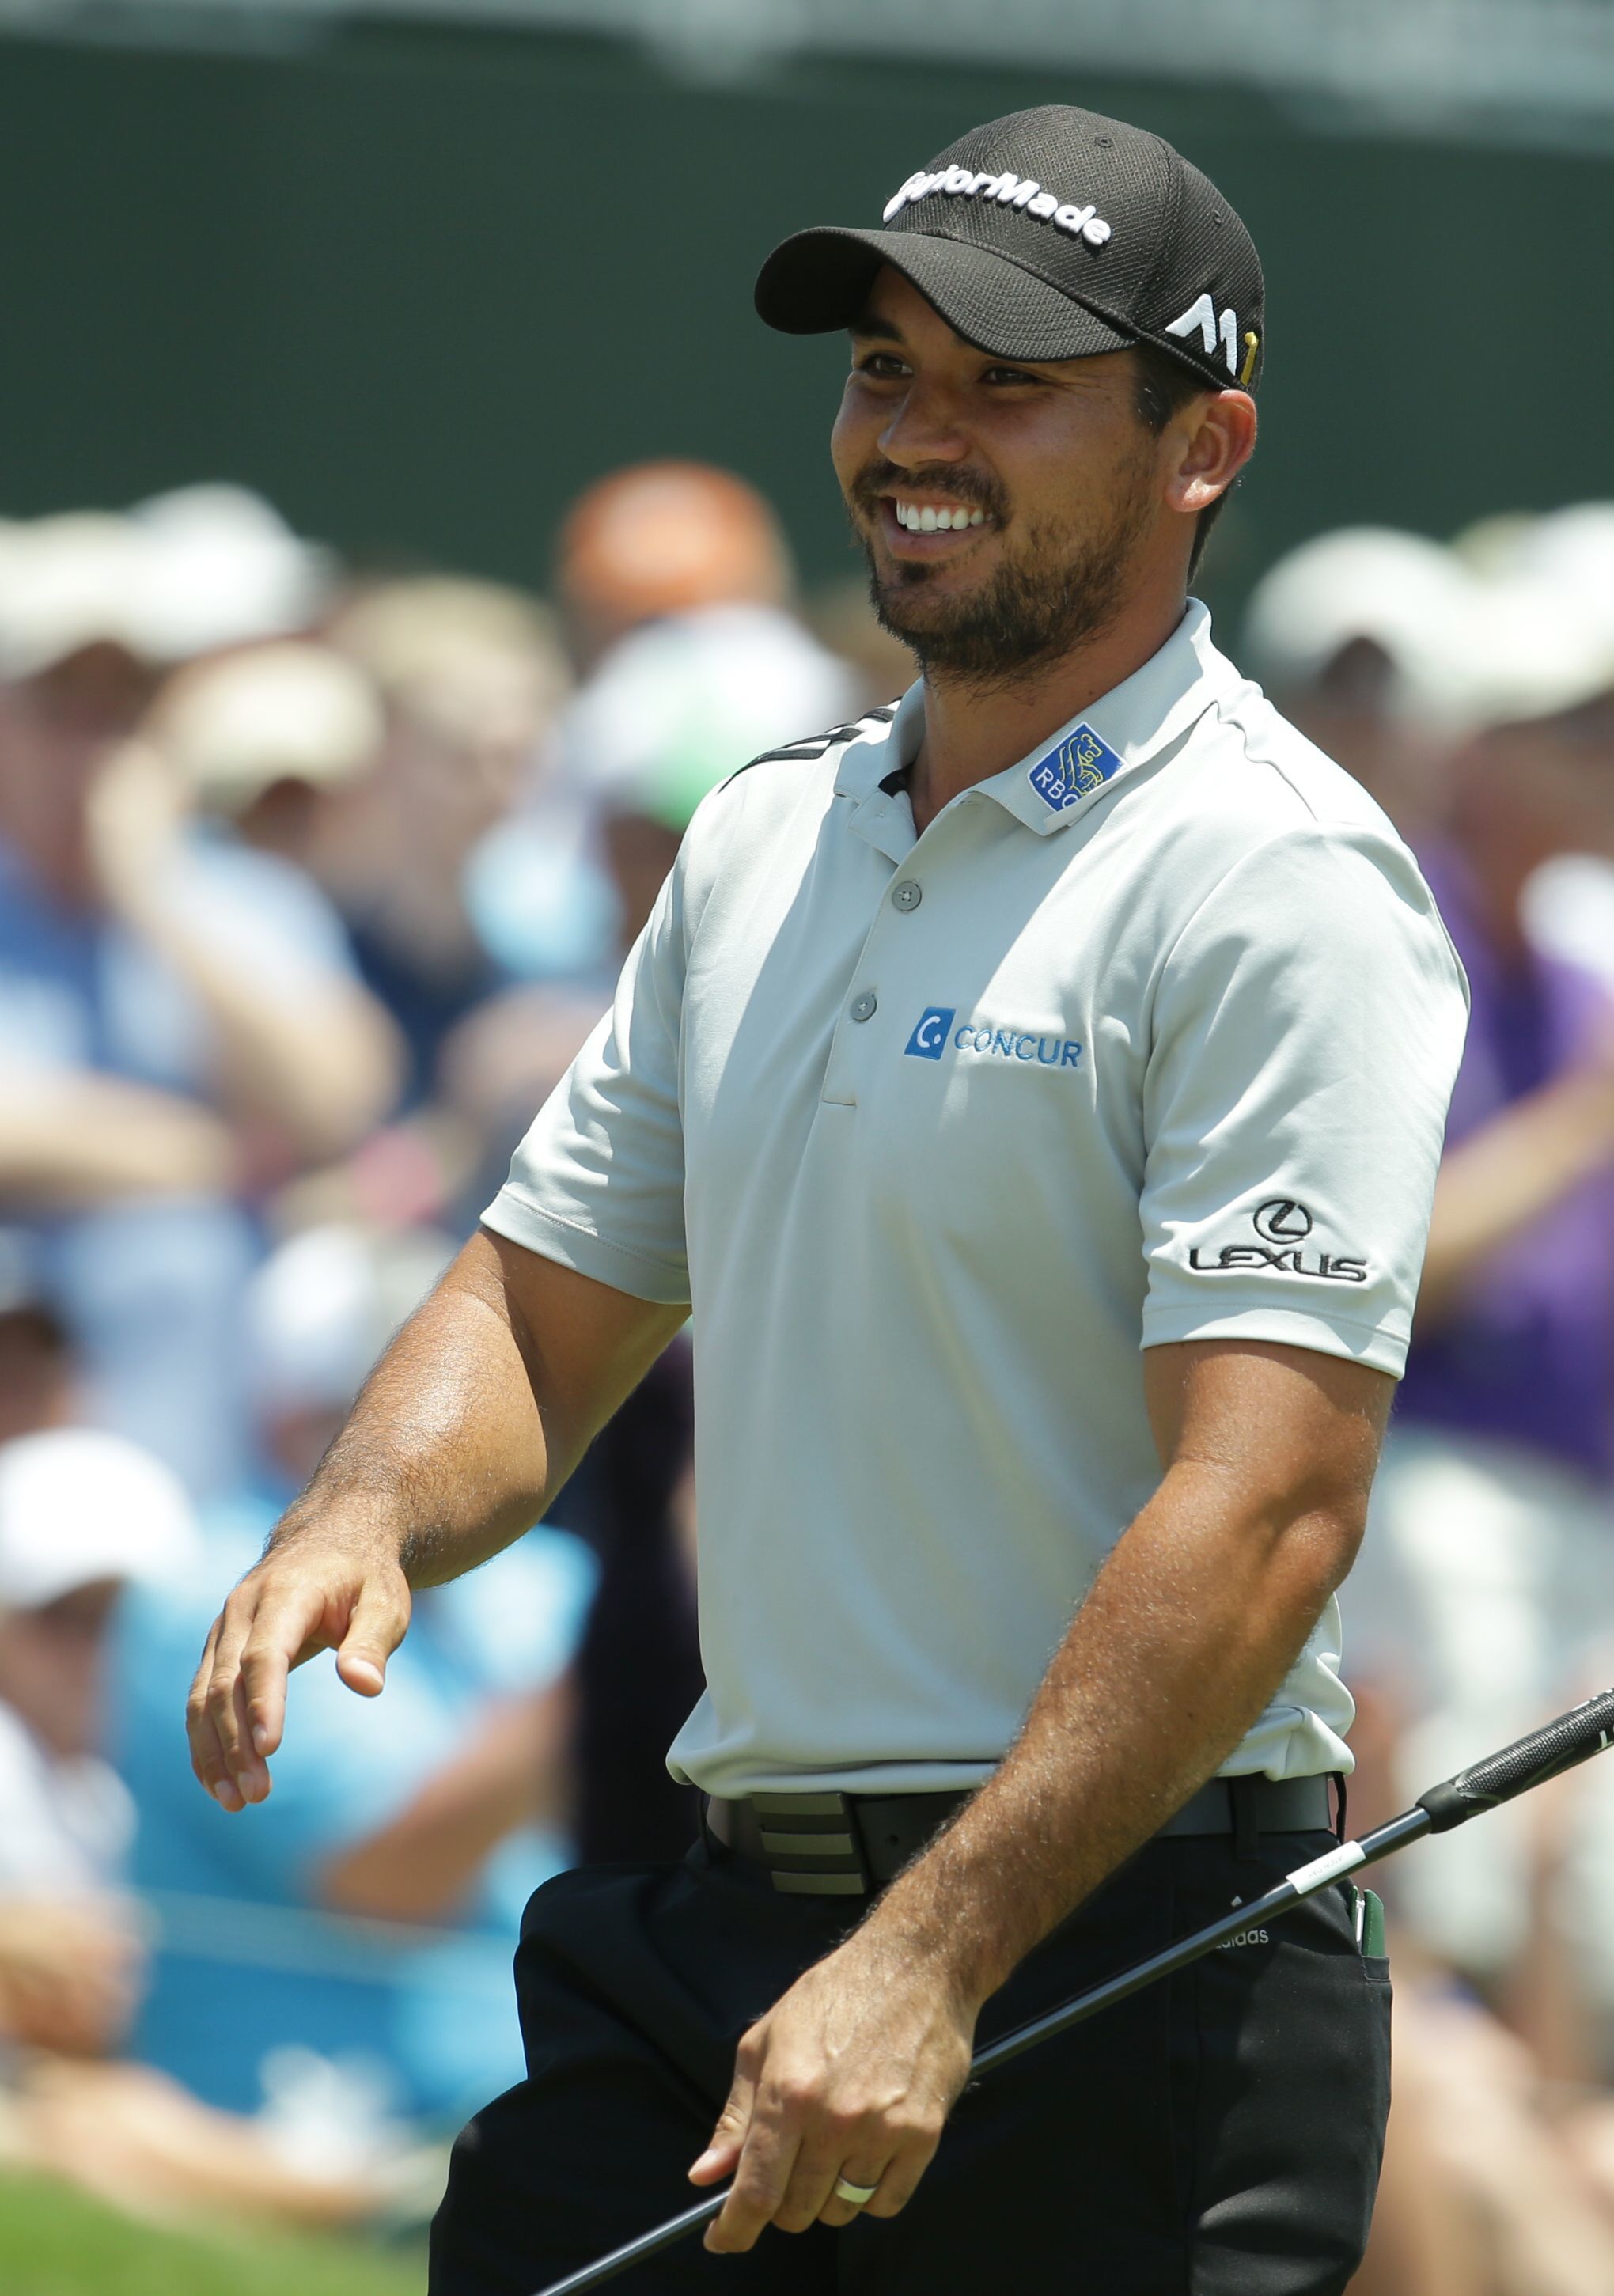 Jason Day of Australia smiles after finishing his record-tying round Thursday at The Players Championship golf tournament in Ponte Vedra Beach, Florida.